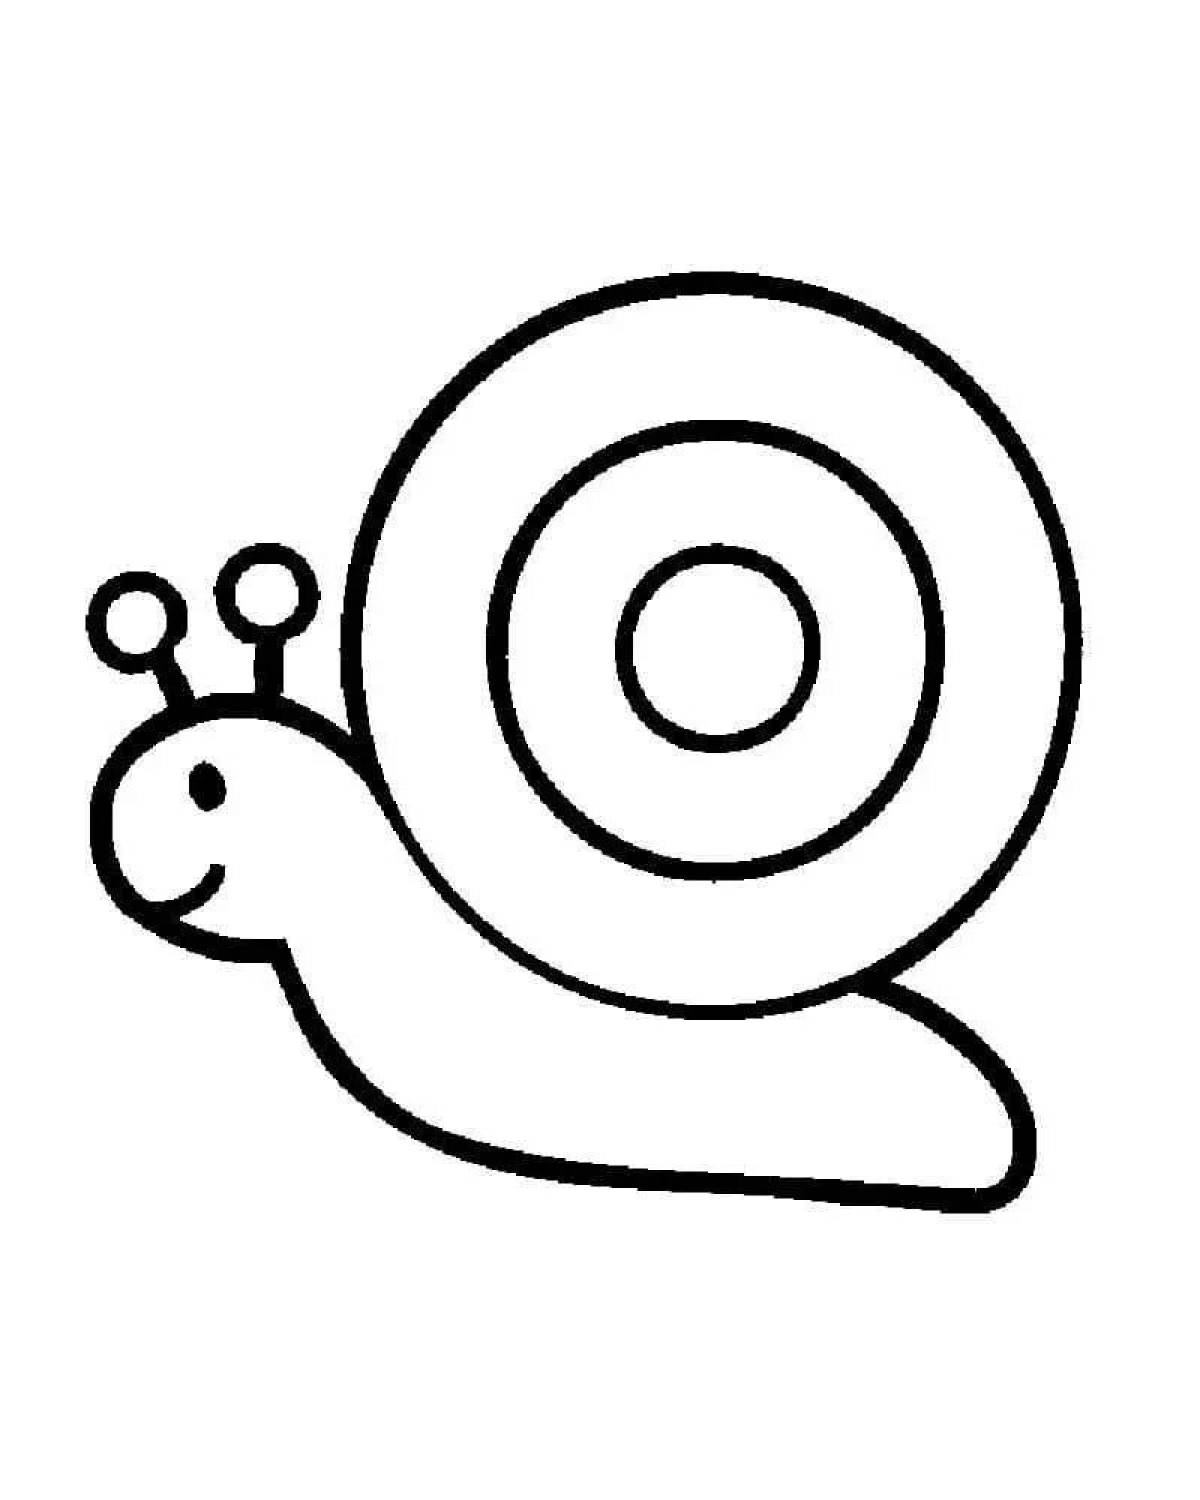 Snail for children 3 4 years old #7